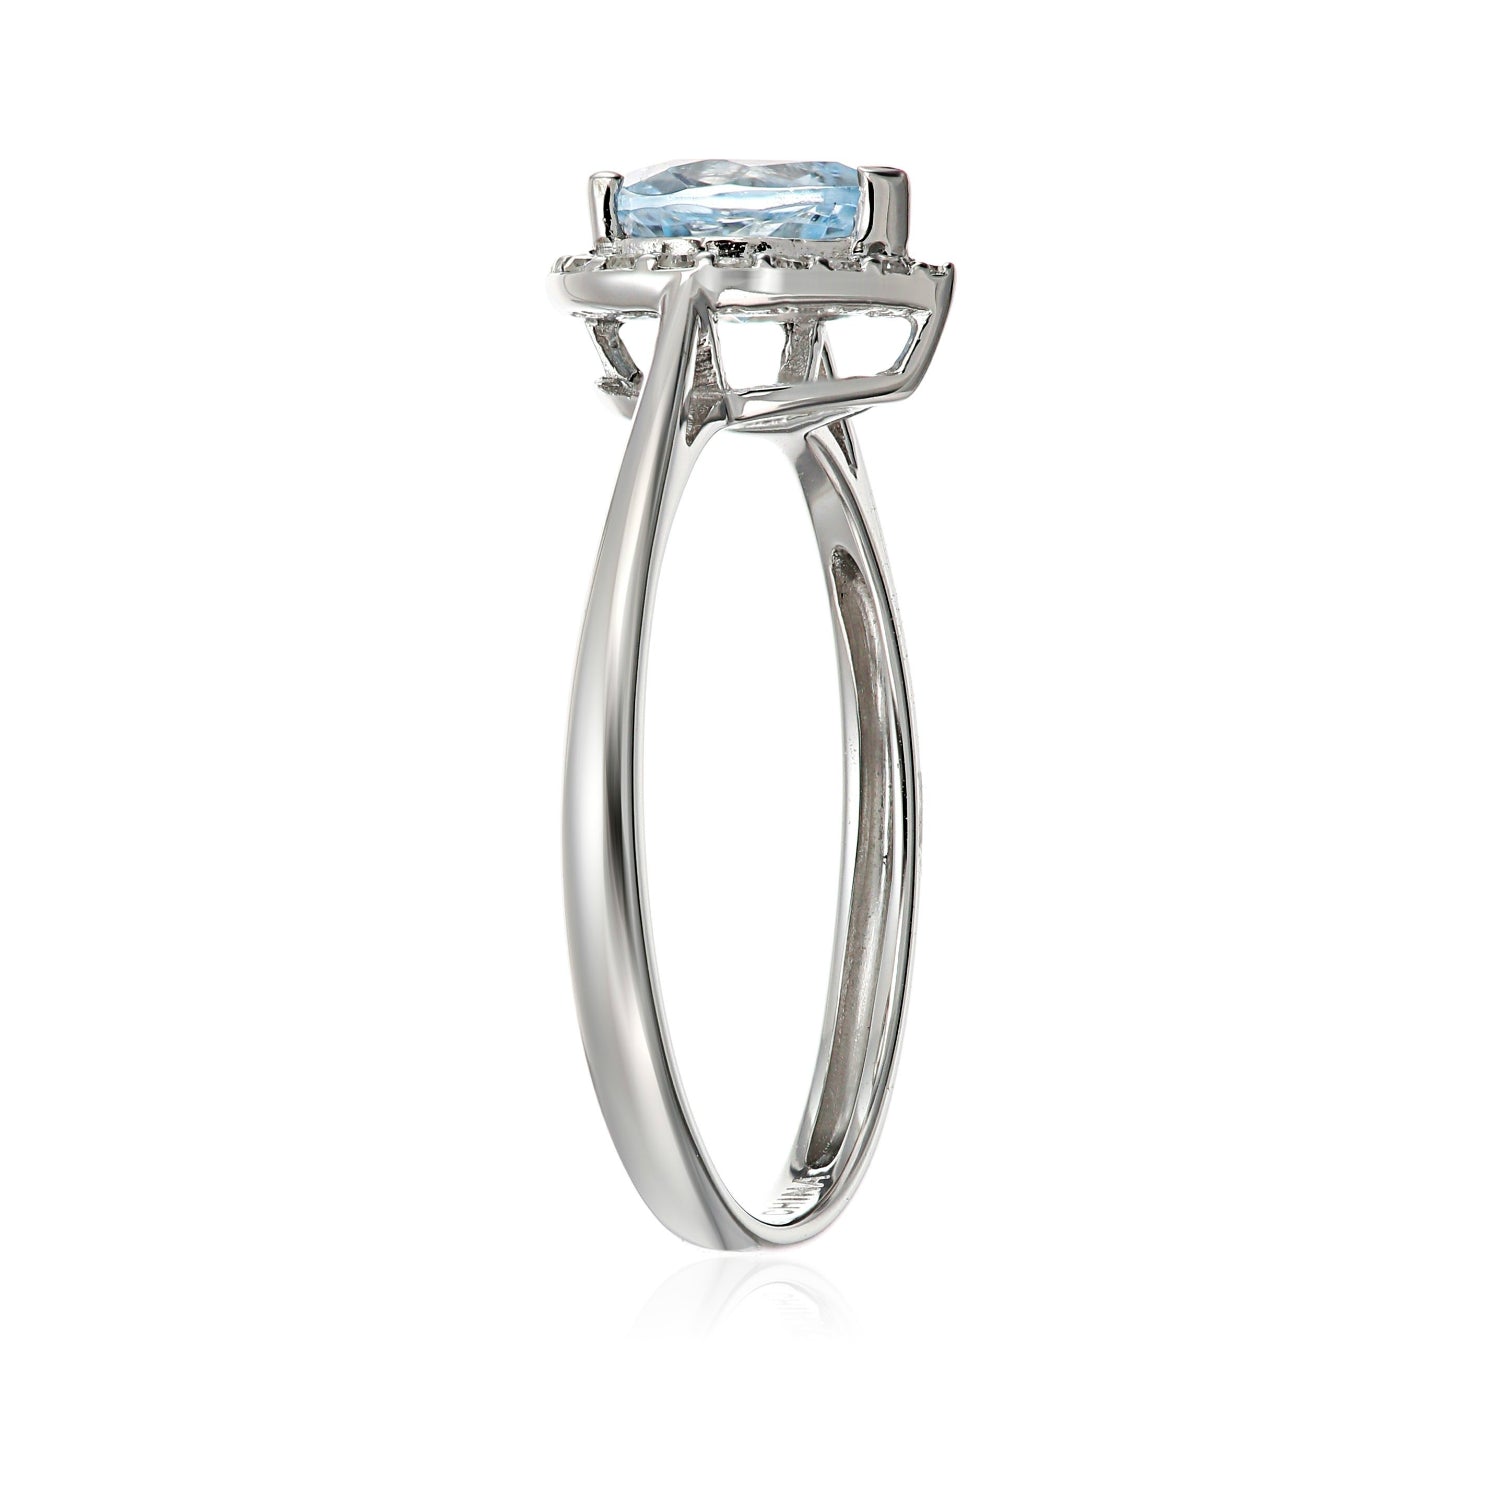 10k White Gold Aquamarine and Diamond Solitaire Heart Halo Engagement Ring (1/10cttw, H-I Color, I1-I2 Clarity), - pinctore